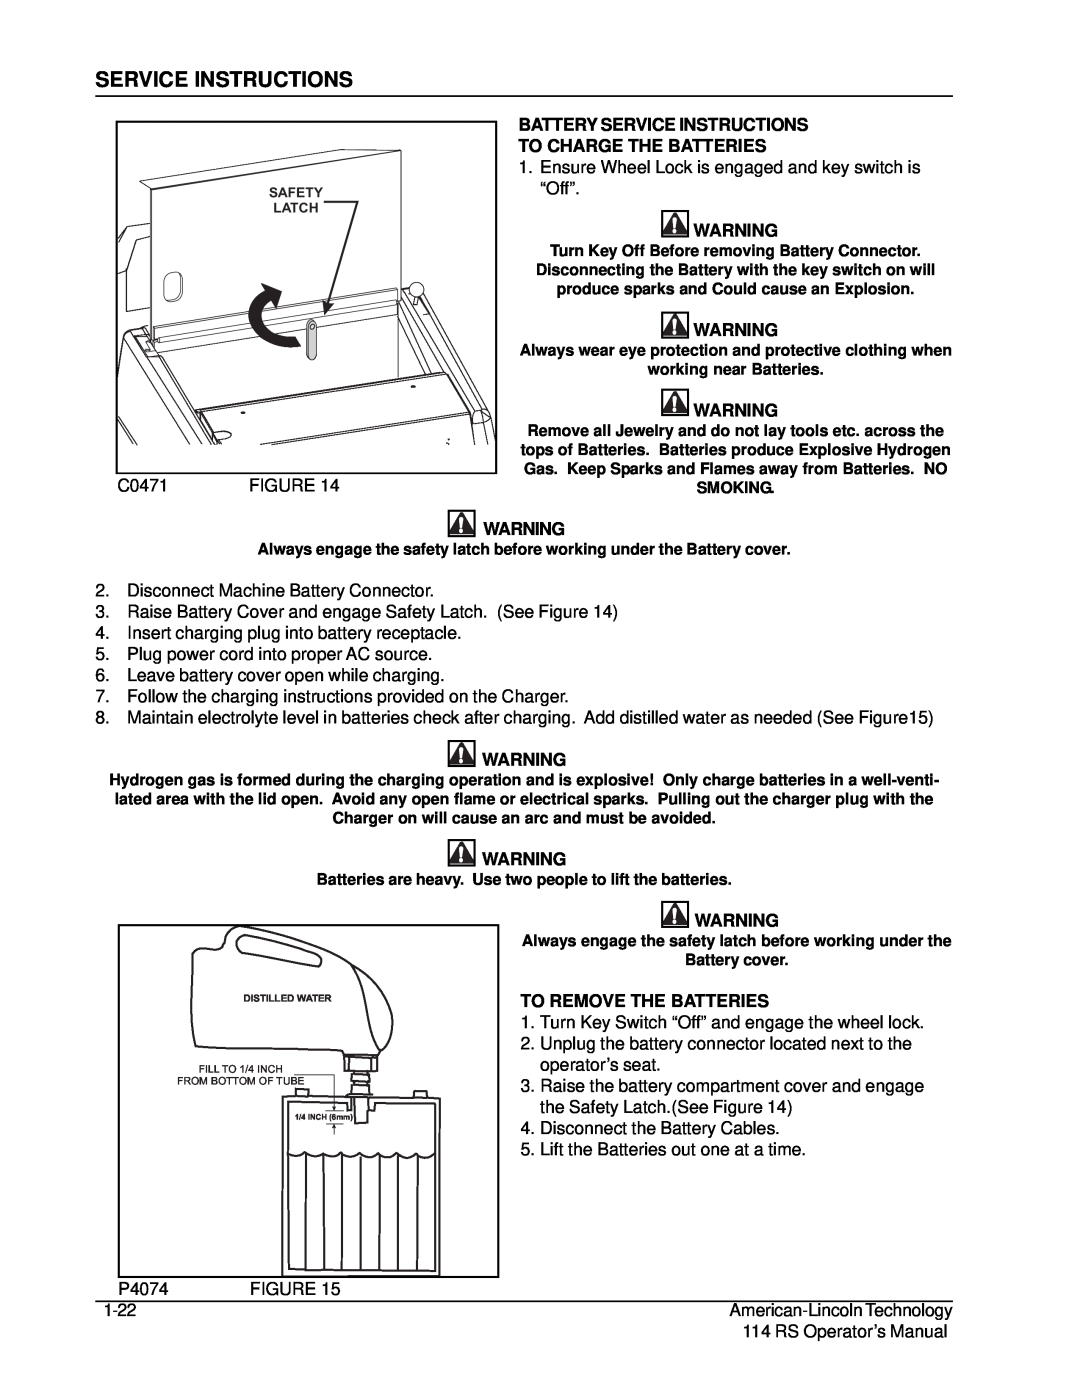 Nilfisk-ALTO 114RS SWEEPER manual C0471, Battery Service Instructions, To Charge The Batteries, To Remove The Batteries 